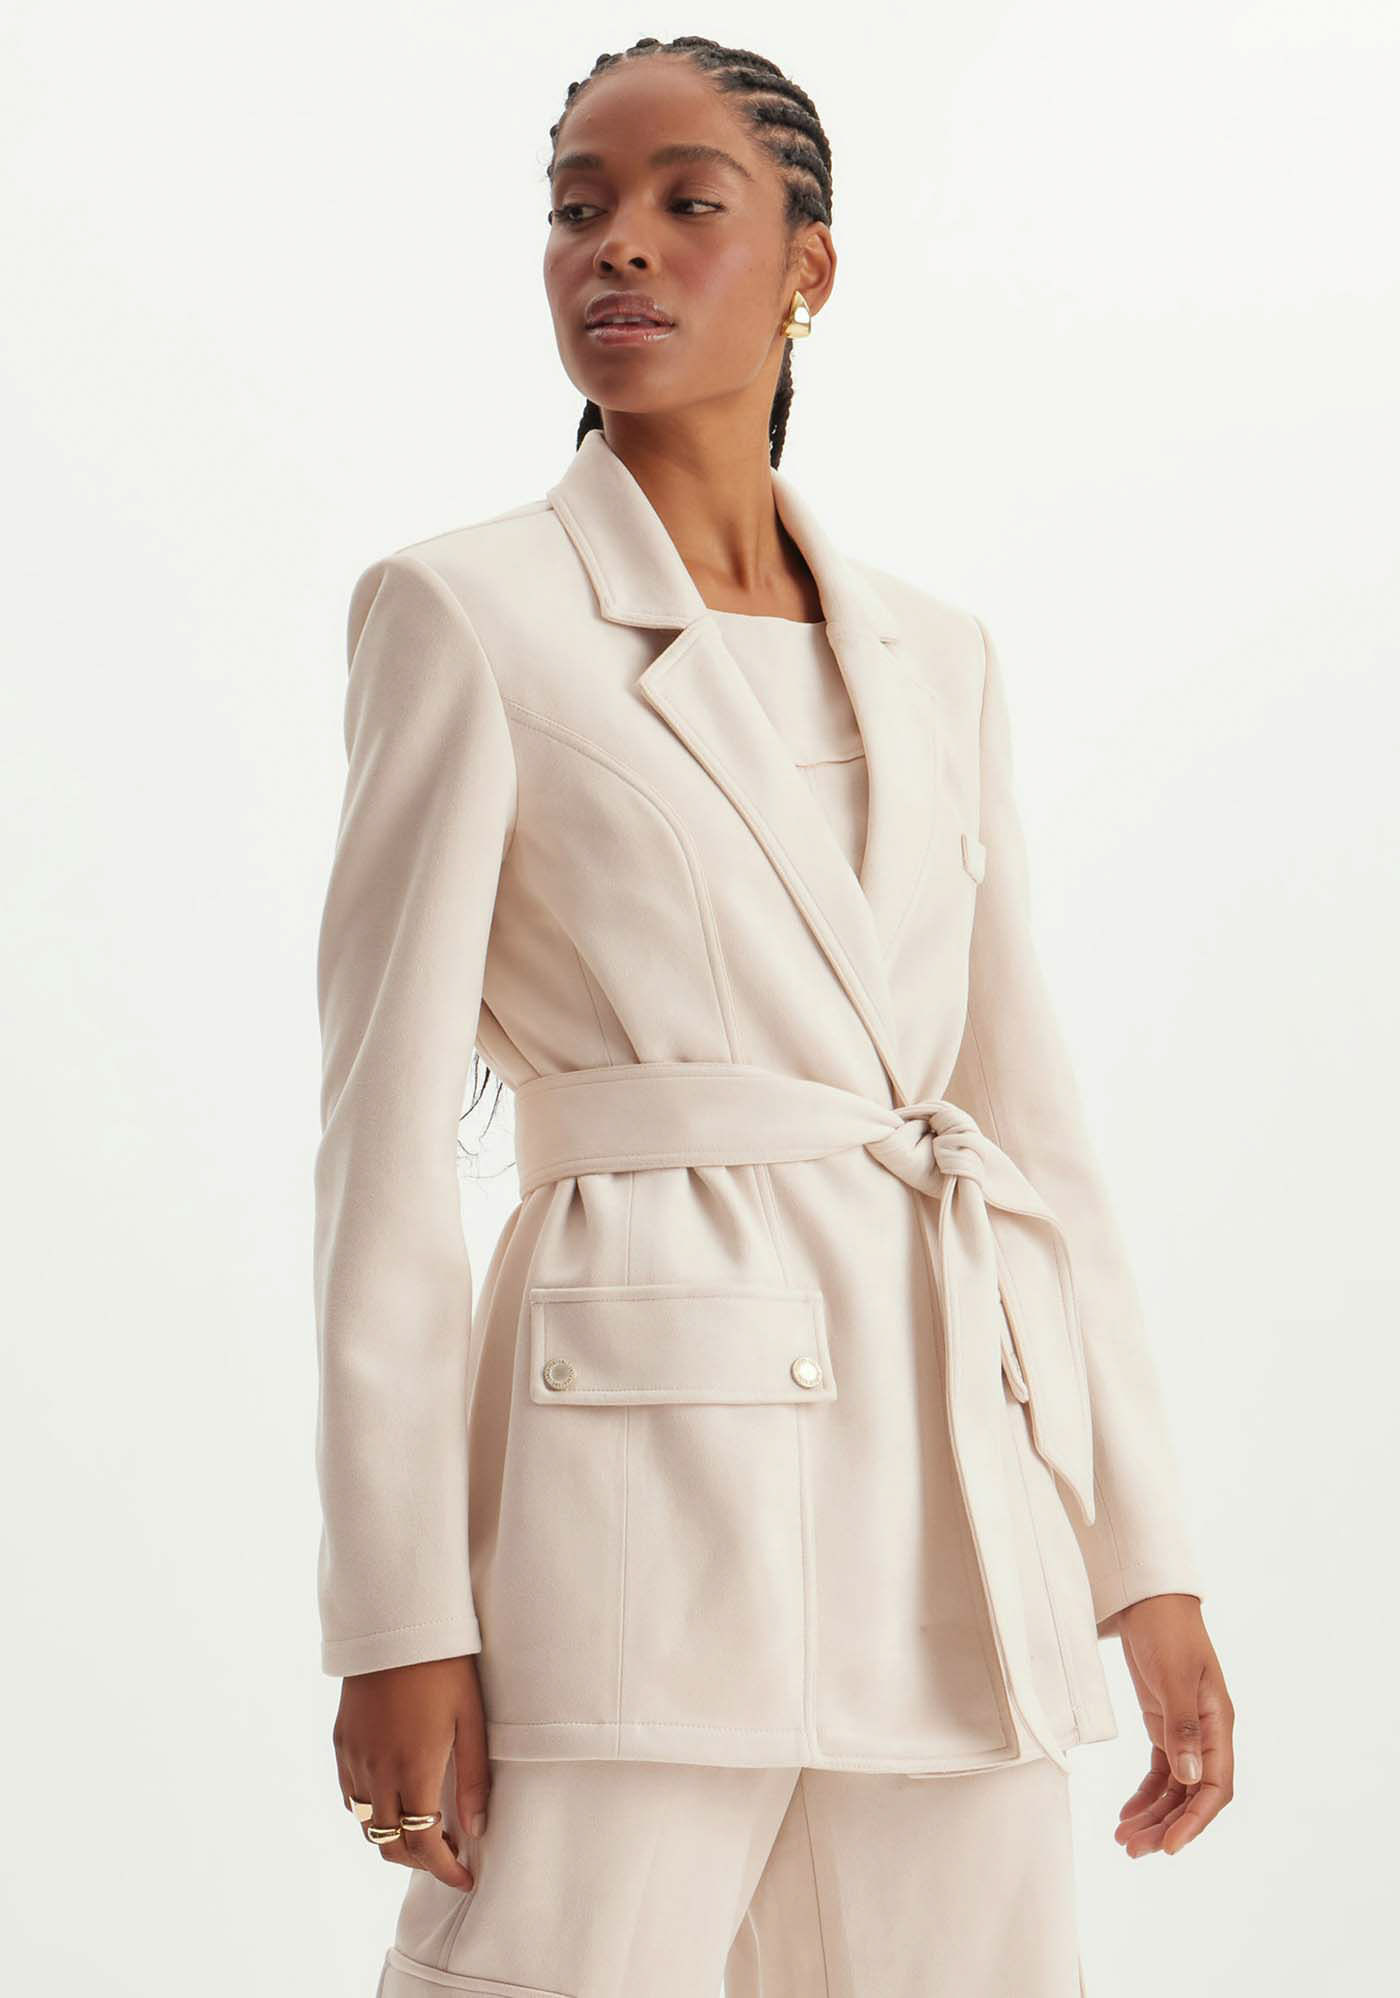 Ivory Double Breasted Blazer Dress Trench Coat